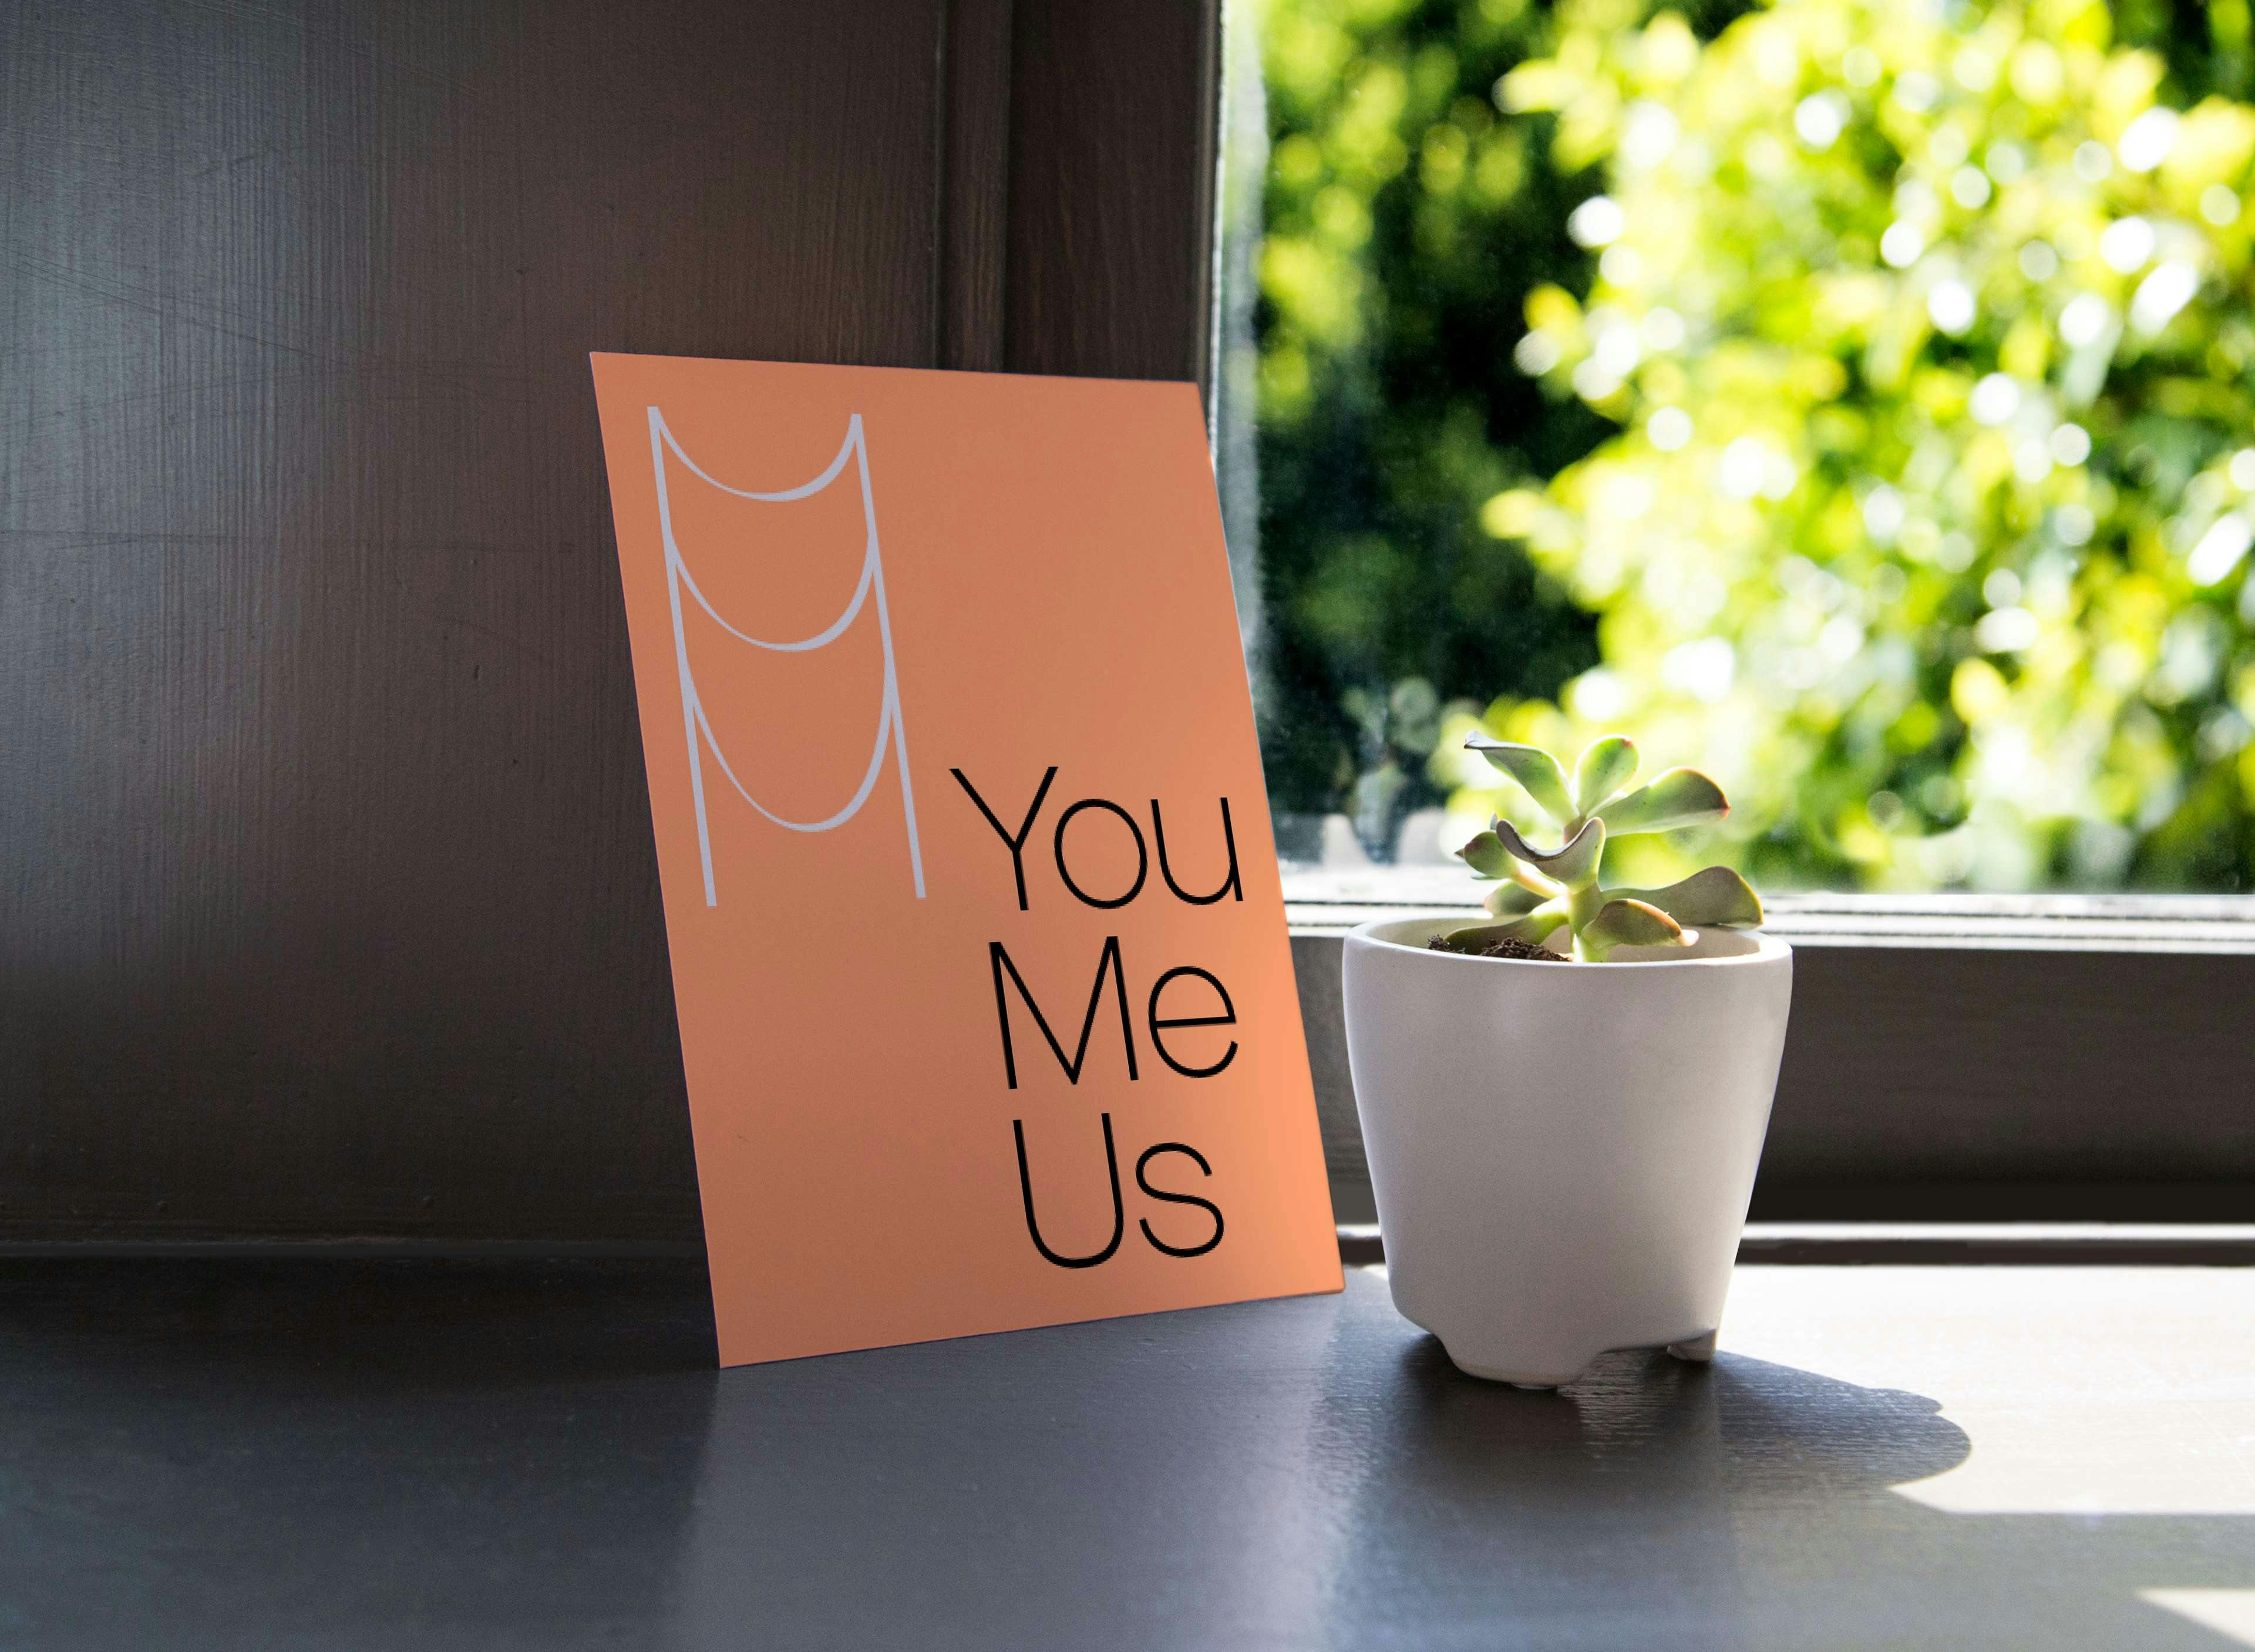 Modern Fertility Postcard says " You, Me, Us" with Community icon